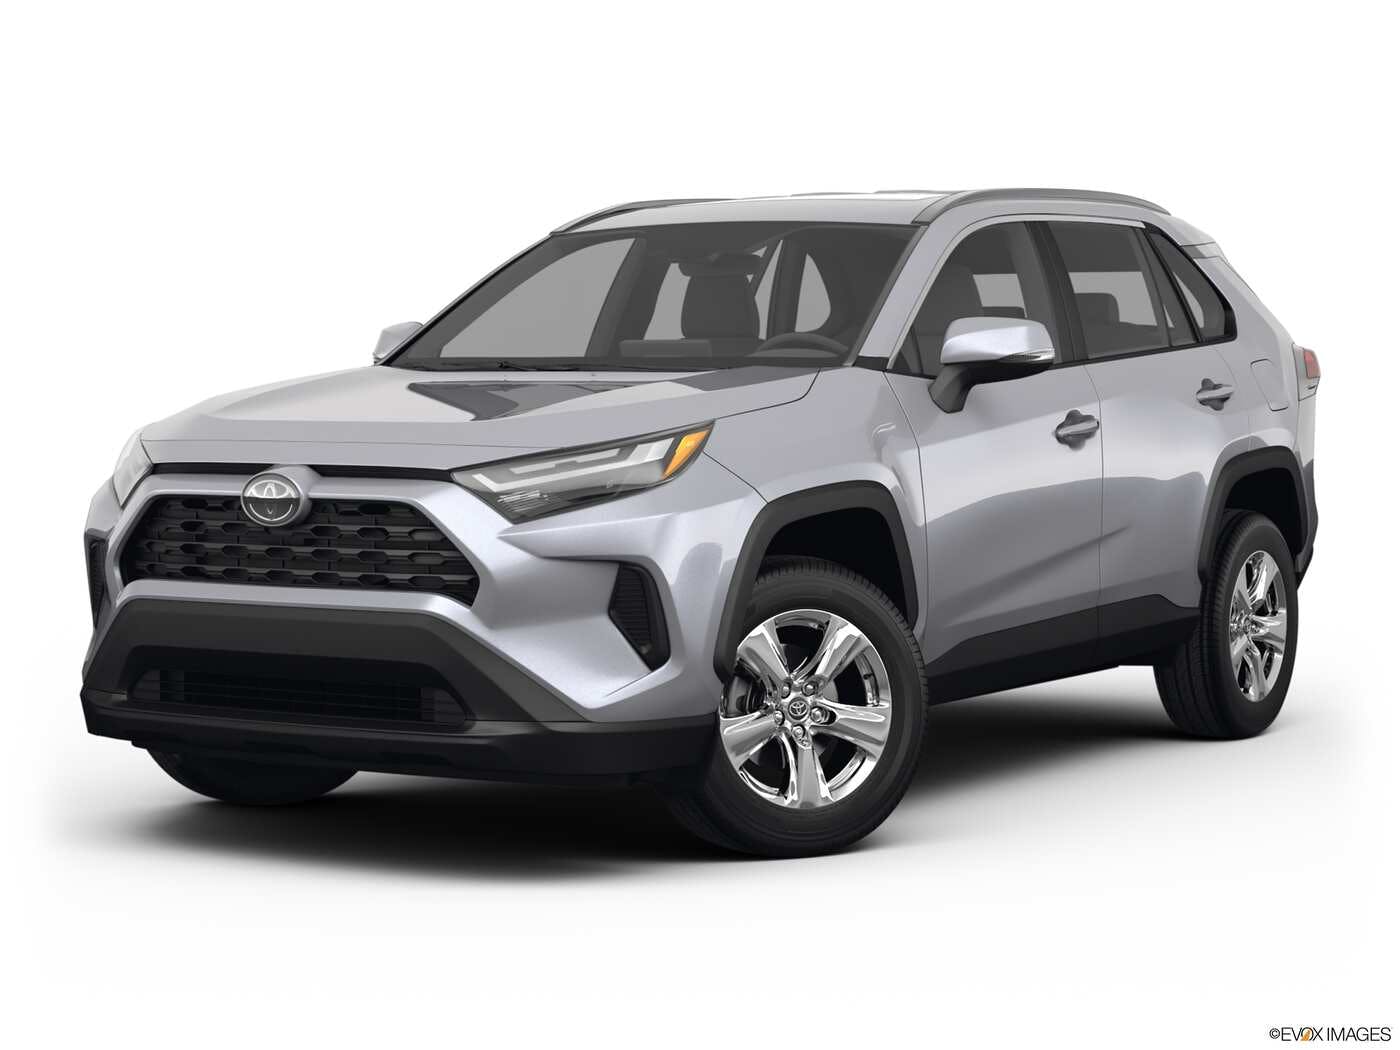 Toyota Rav4 Lease Specials Discover The 9 Videos & 90+ Images